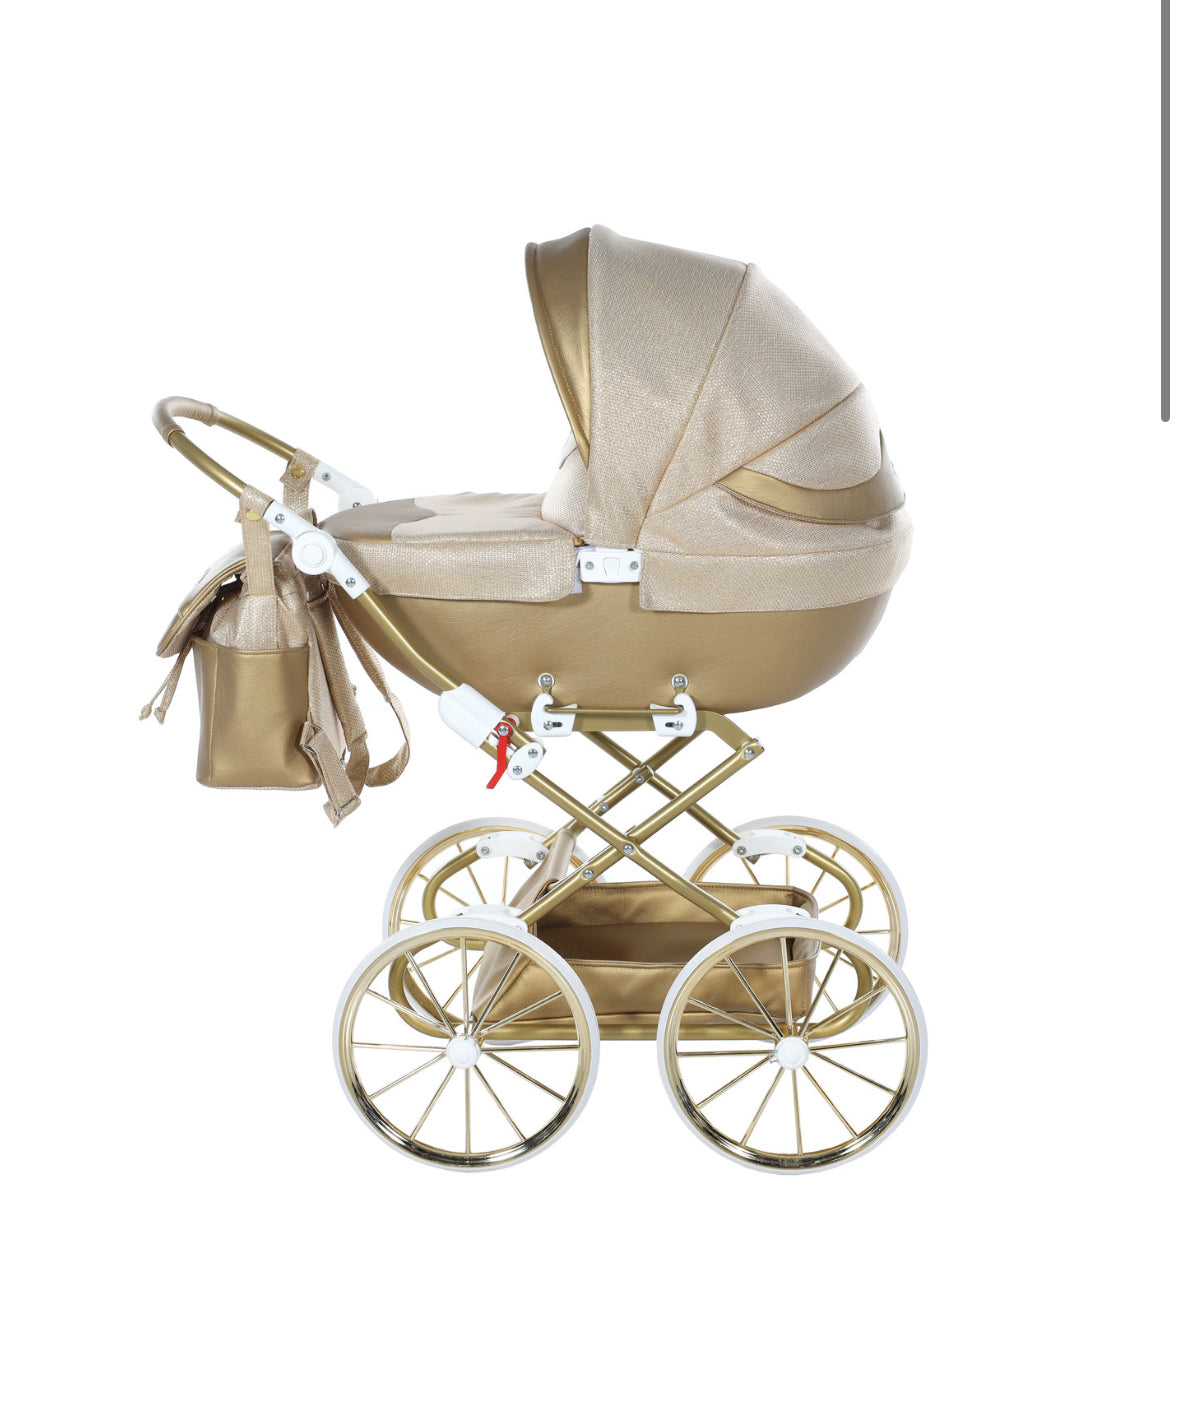 GOLD DOLCE DOLL'S PRAM - Up to 21 days delivery!